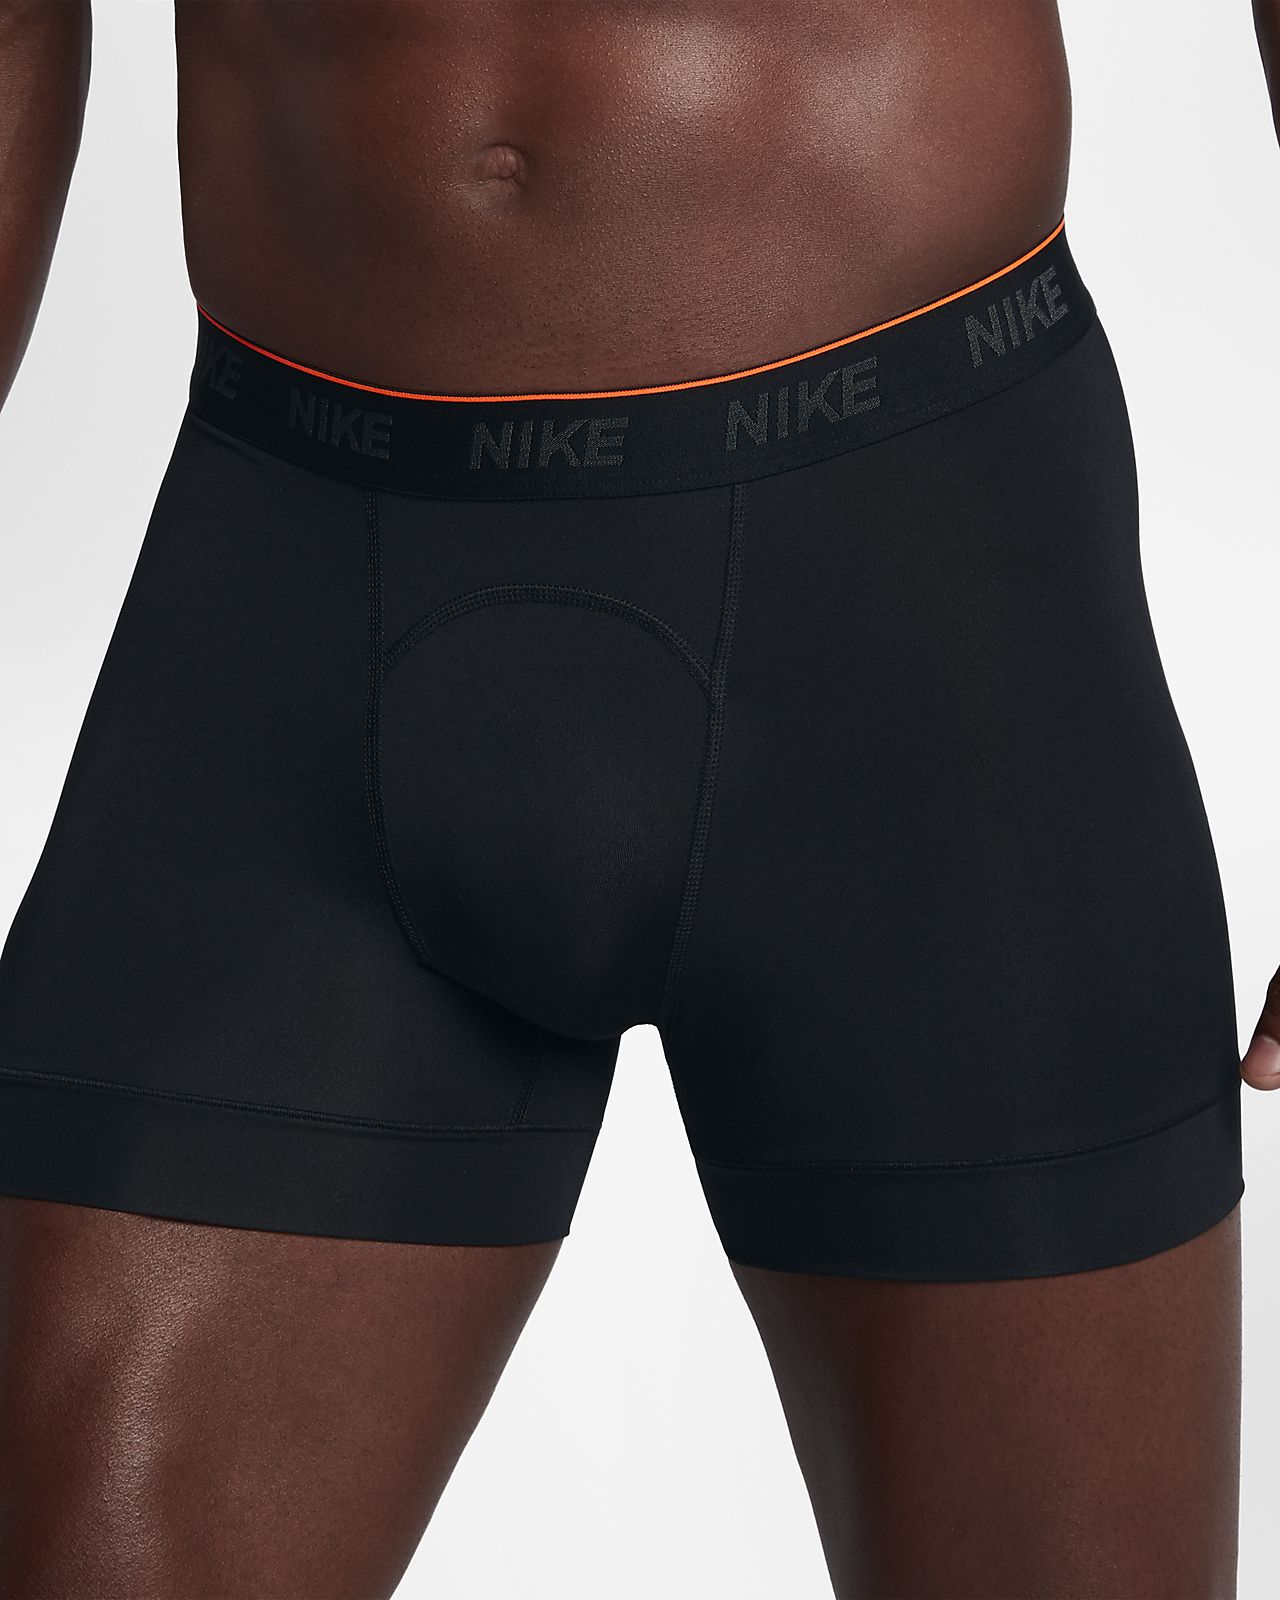 nike youth boxer briefs, OFF 74%,Cheap 